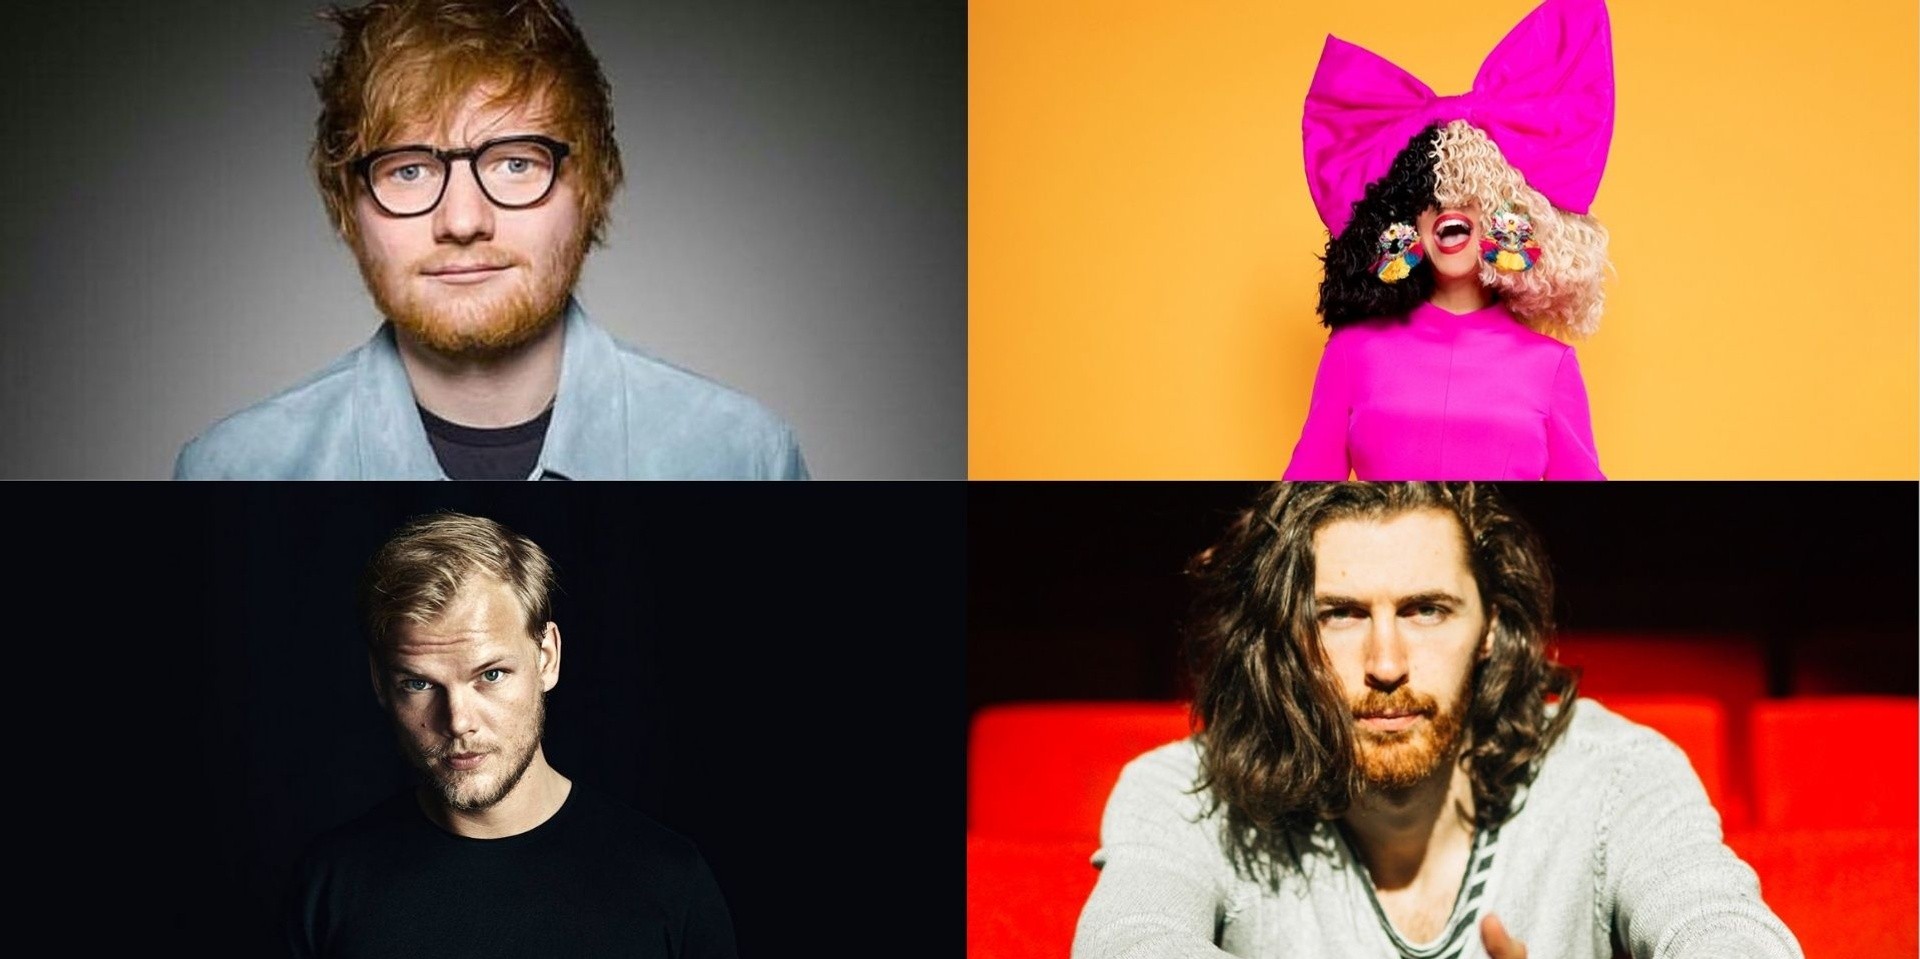 Songs by Ed Sheeran, Avicii, Sia, Hozier, and more included in Top 100 Shazams of all time – listen